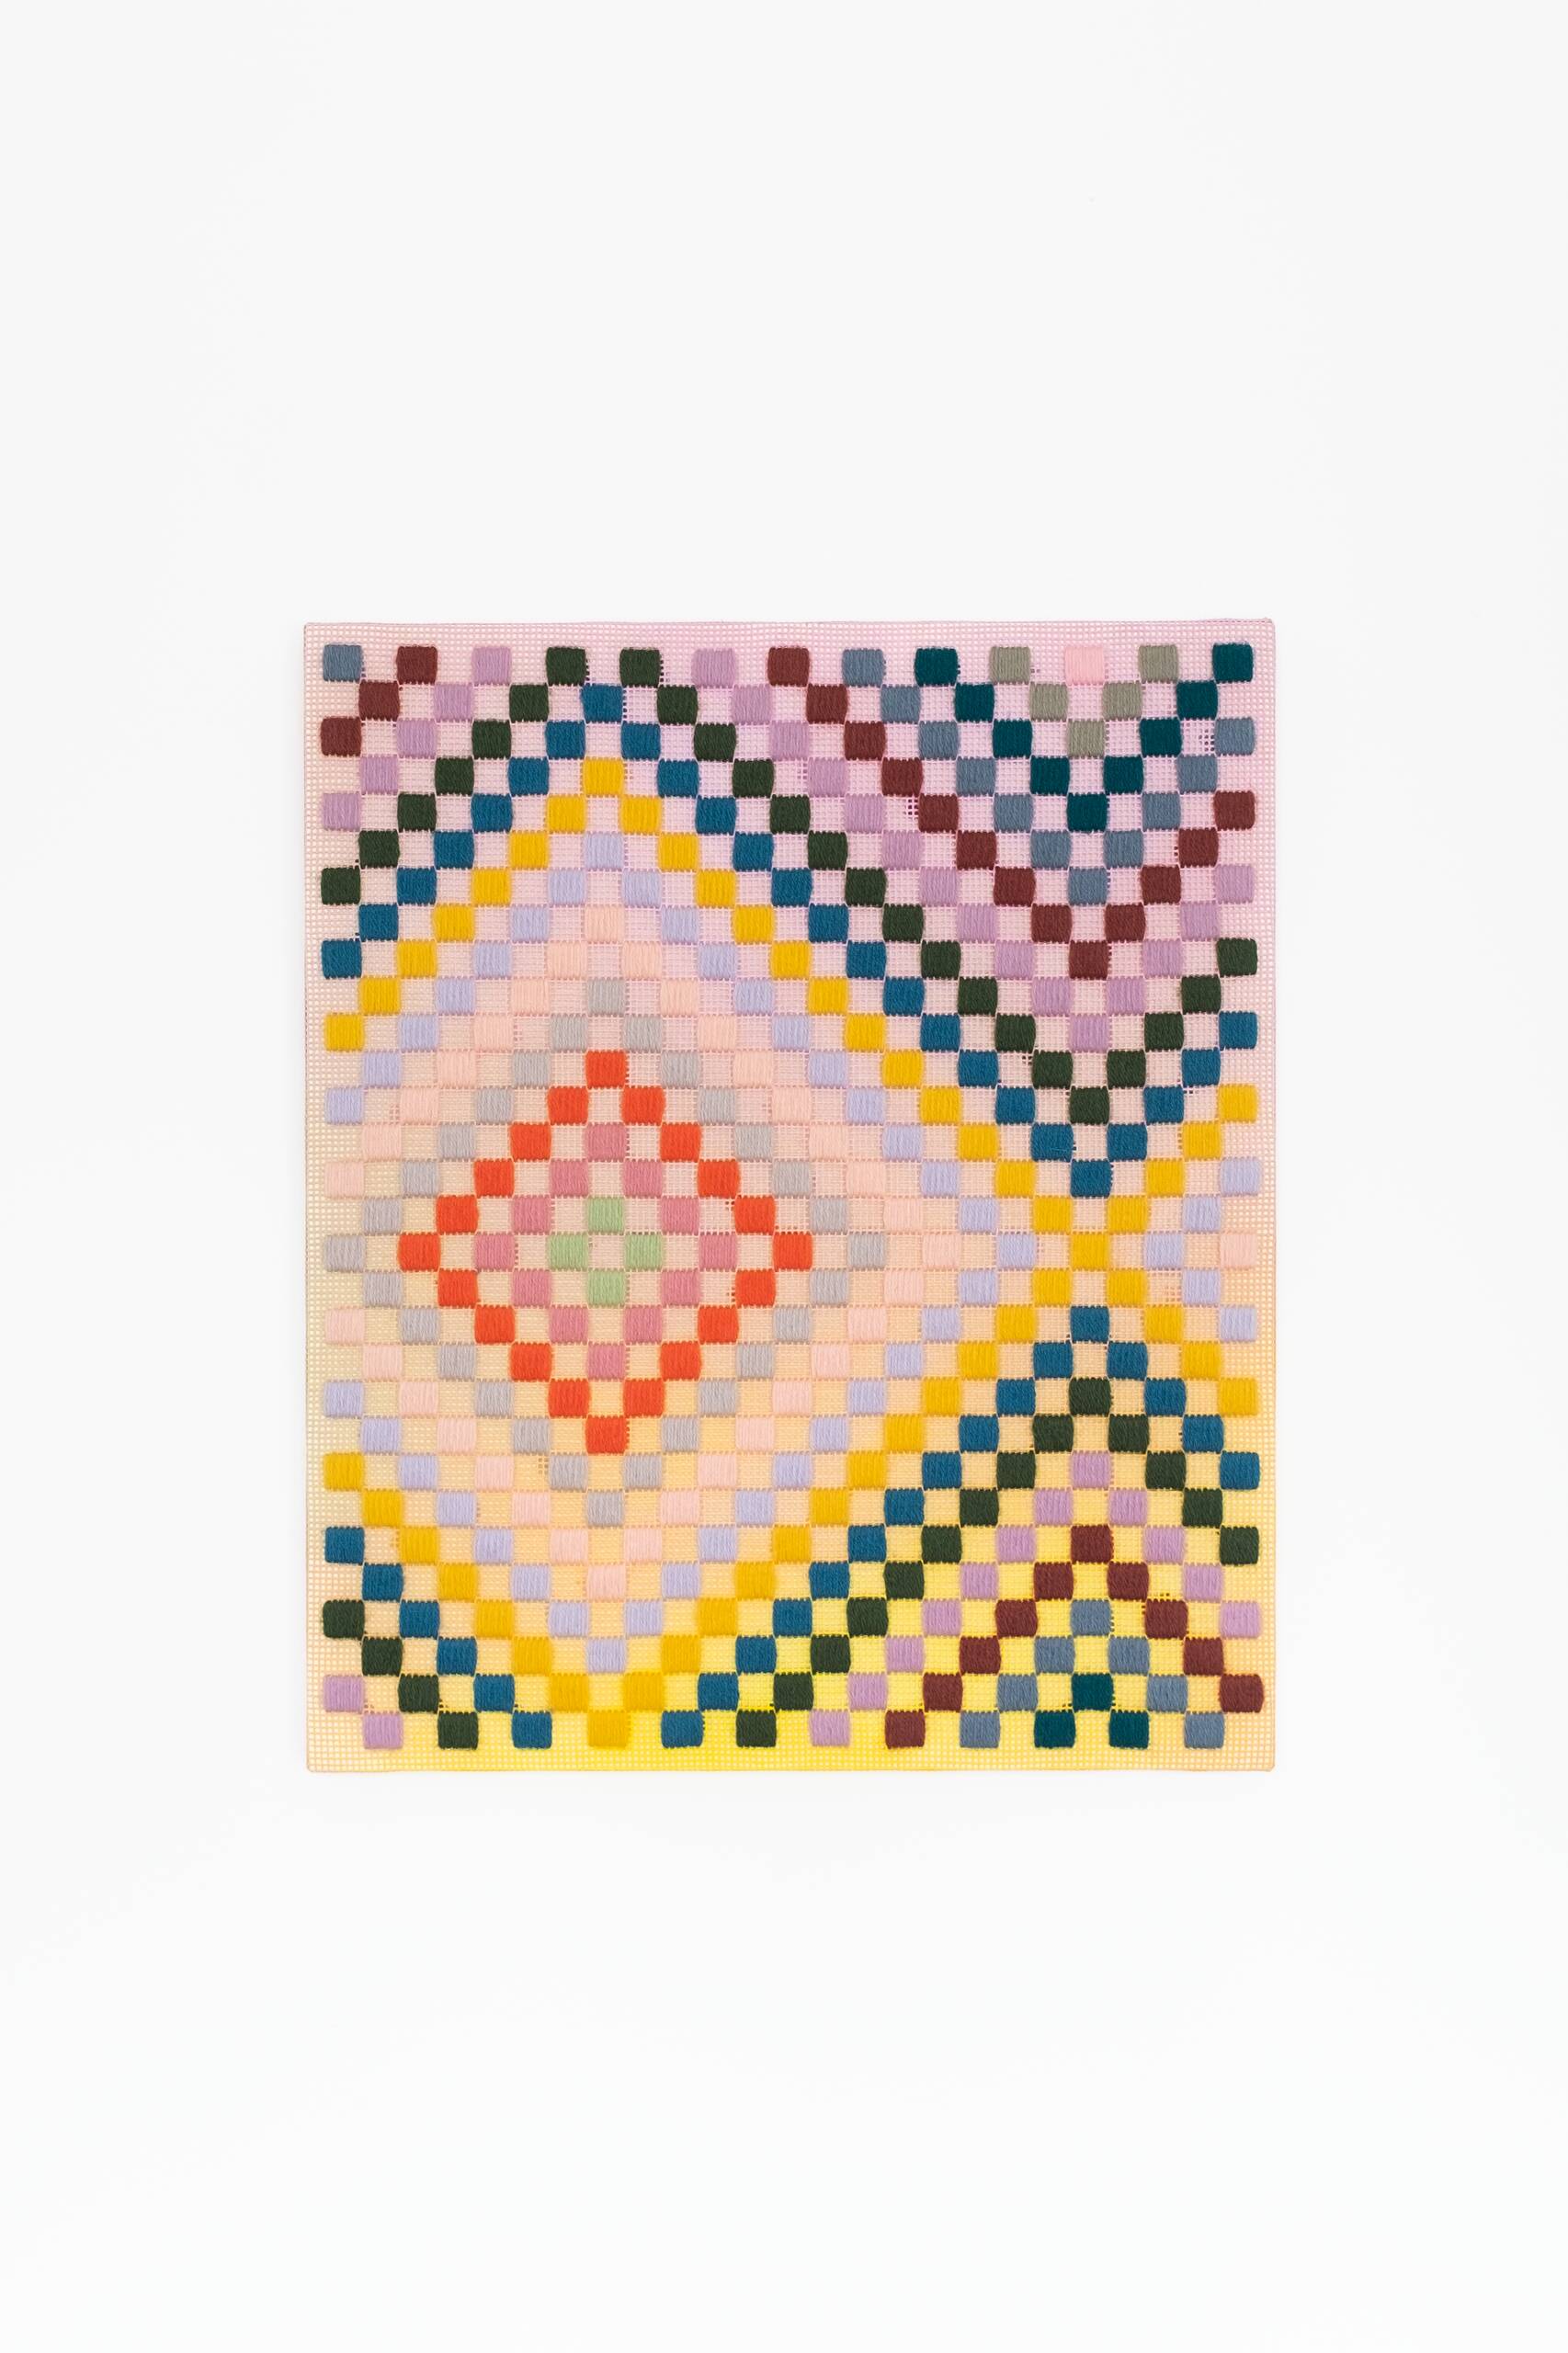 Punch card -- Patchwork [blue], Hand-embroidered wool yarn and acrylic paint on canvas, 2022